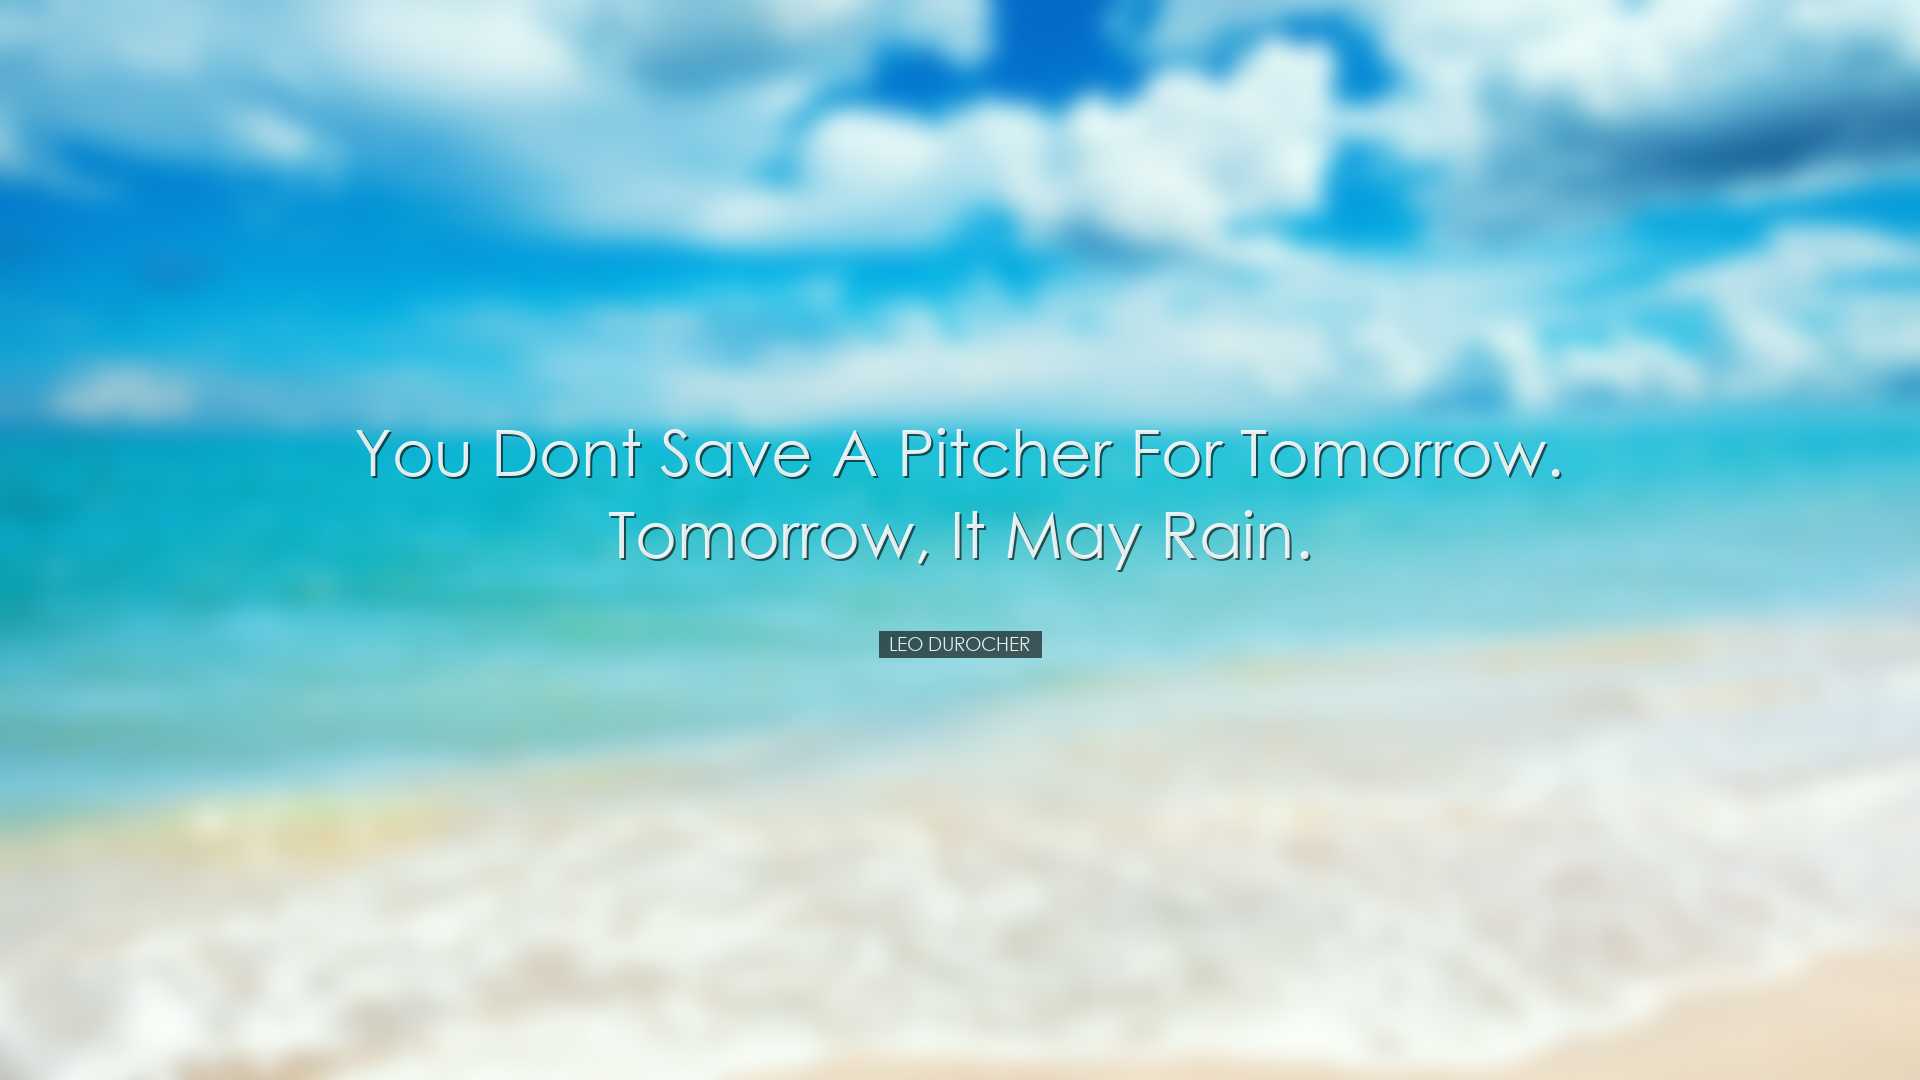 You dont save a pitcher for tomorrow. Tomorrow, it may rain. - Leo